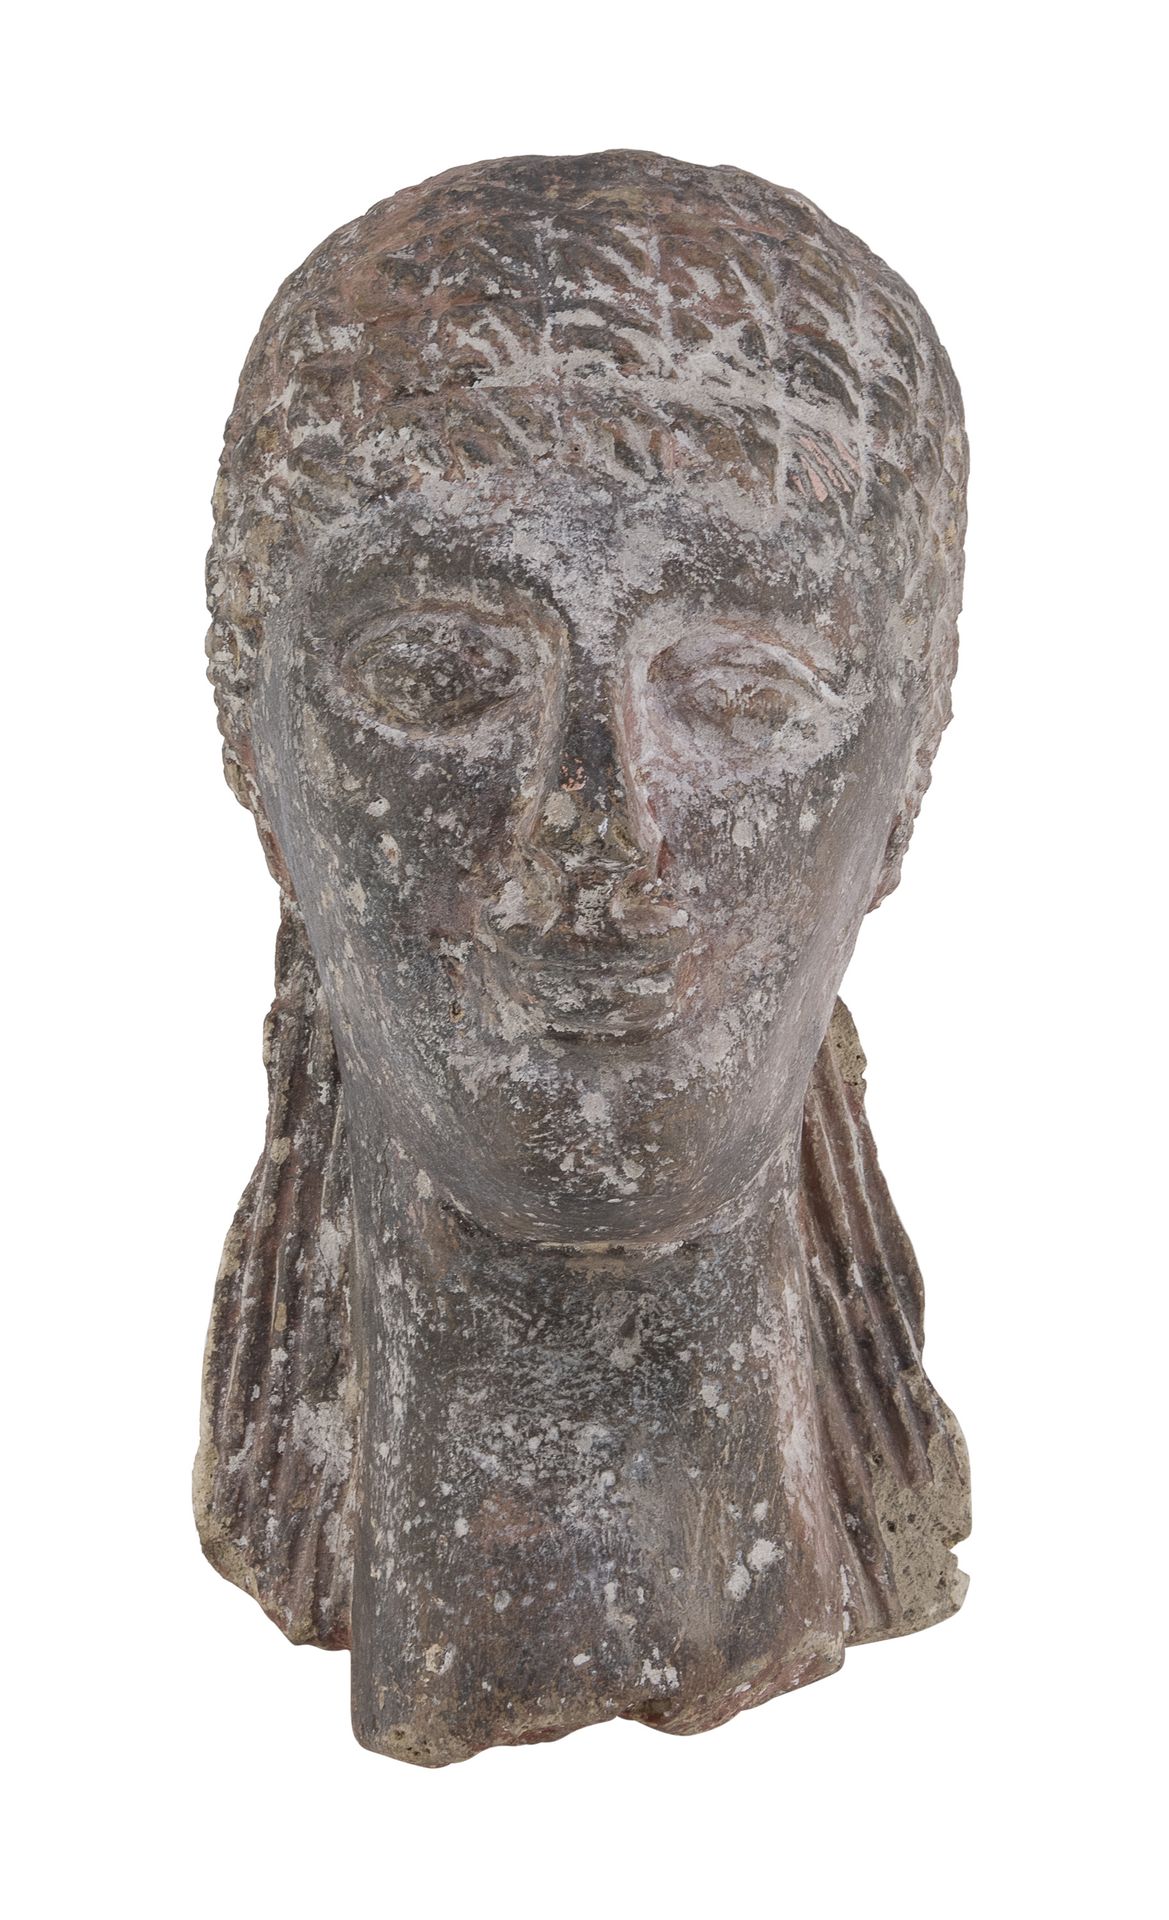 Null HEAD IN COMPOSITE MATERIAL, ETRUSCAN STYLE, 20TH CENTURY